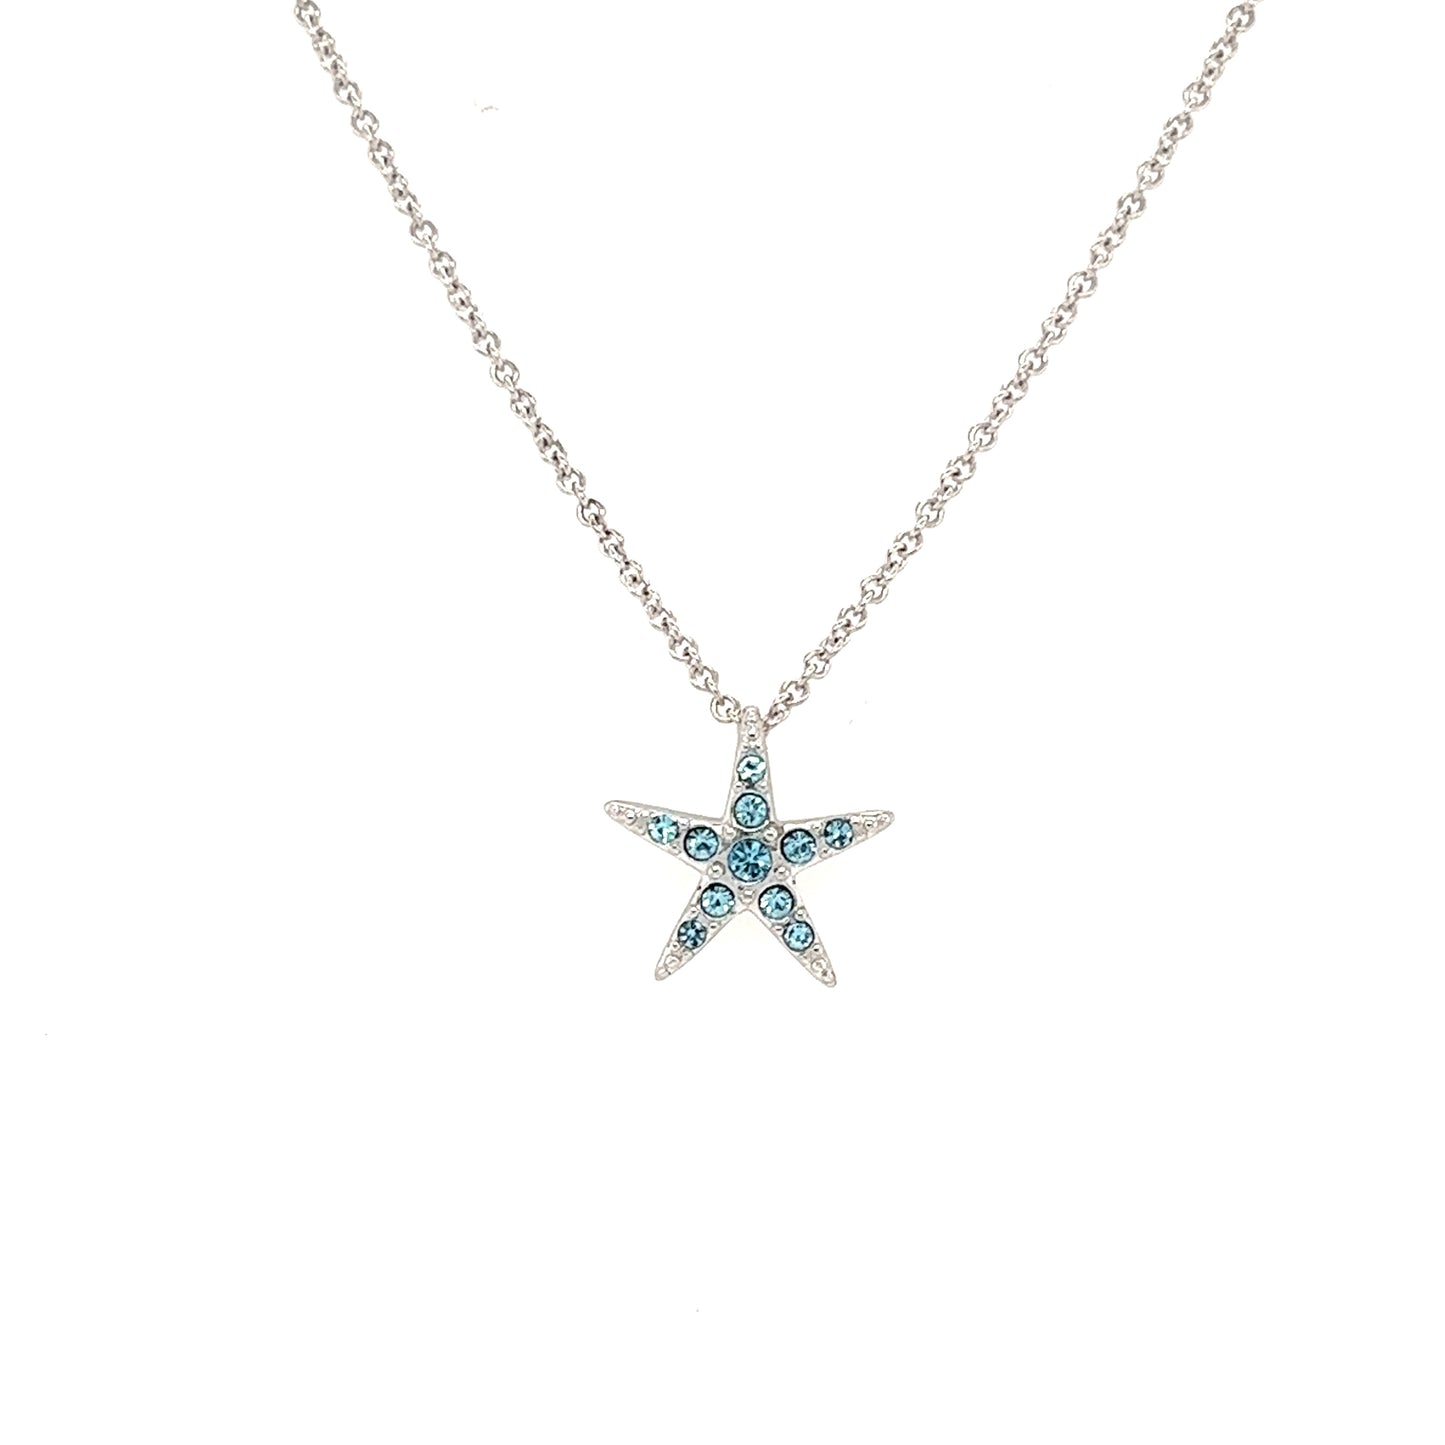 Small Starfish Necklace with Aqua Crystals in Sterling Silver Front View